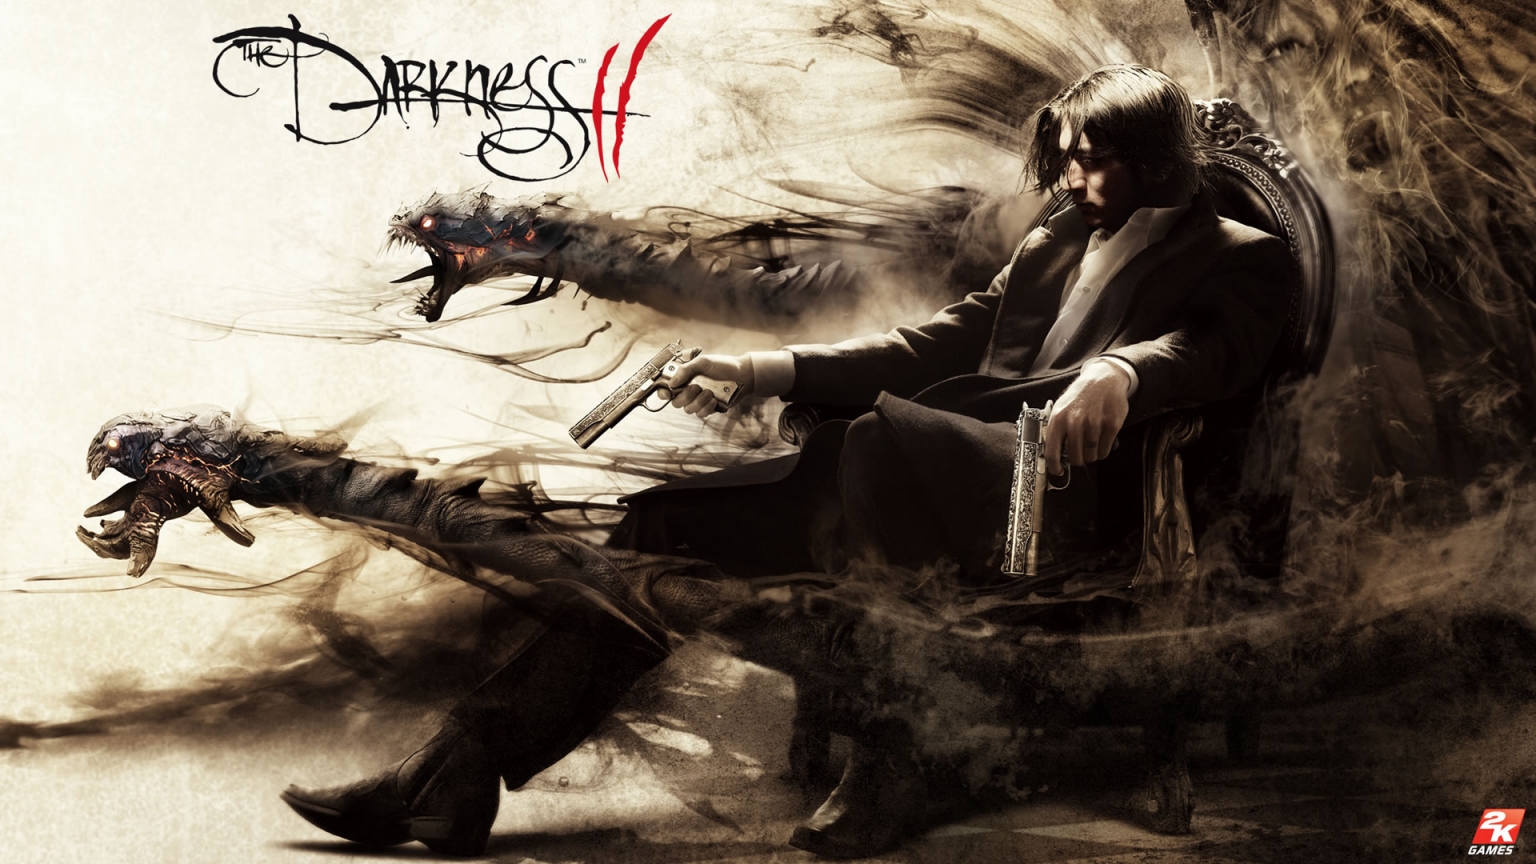 The Darkness II for 1536 x 864 HDTV resolution